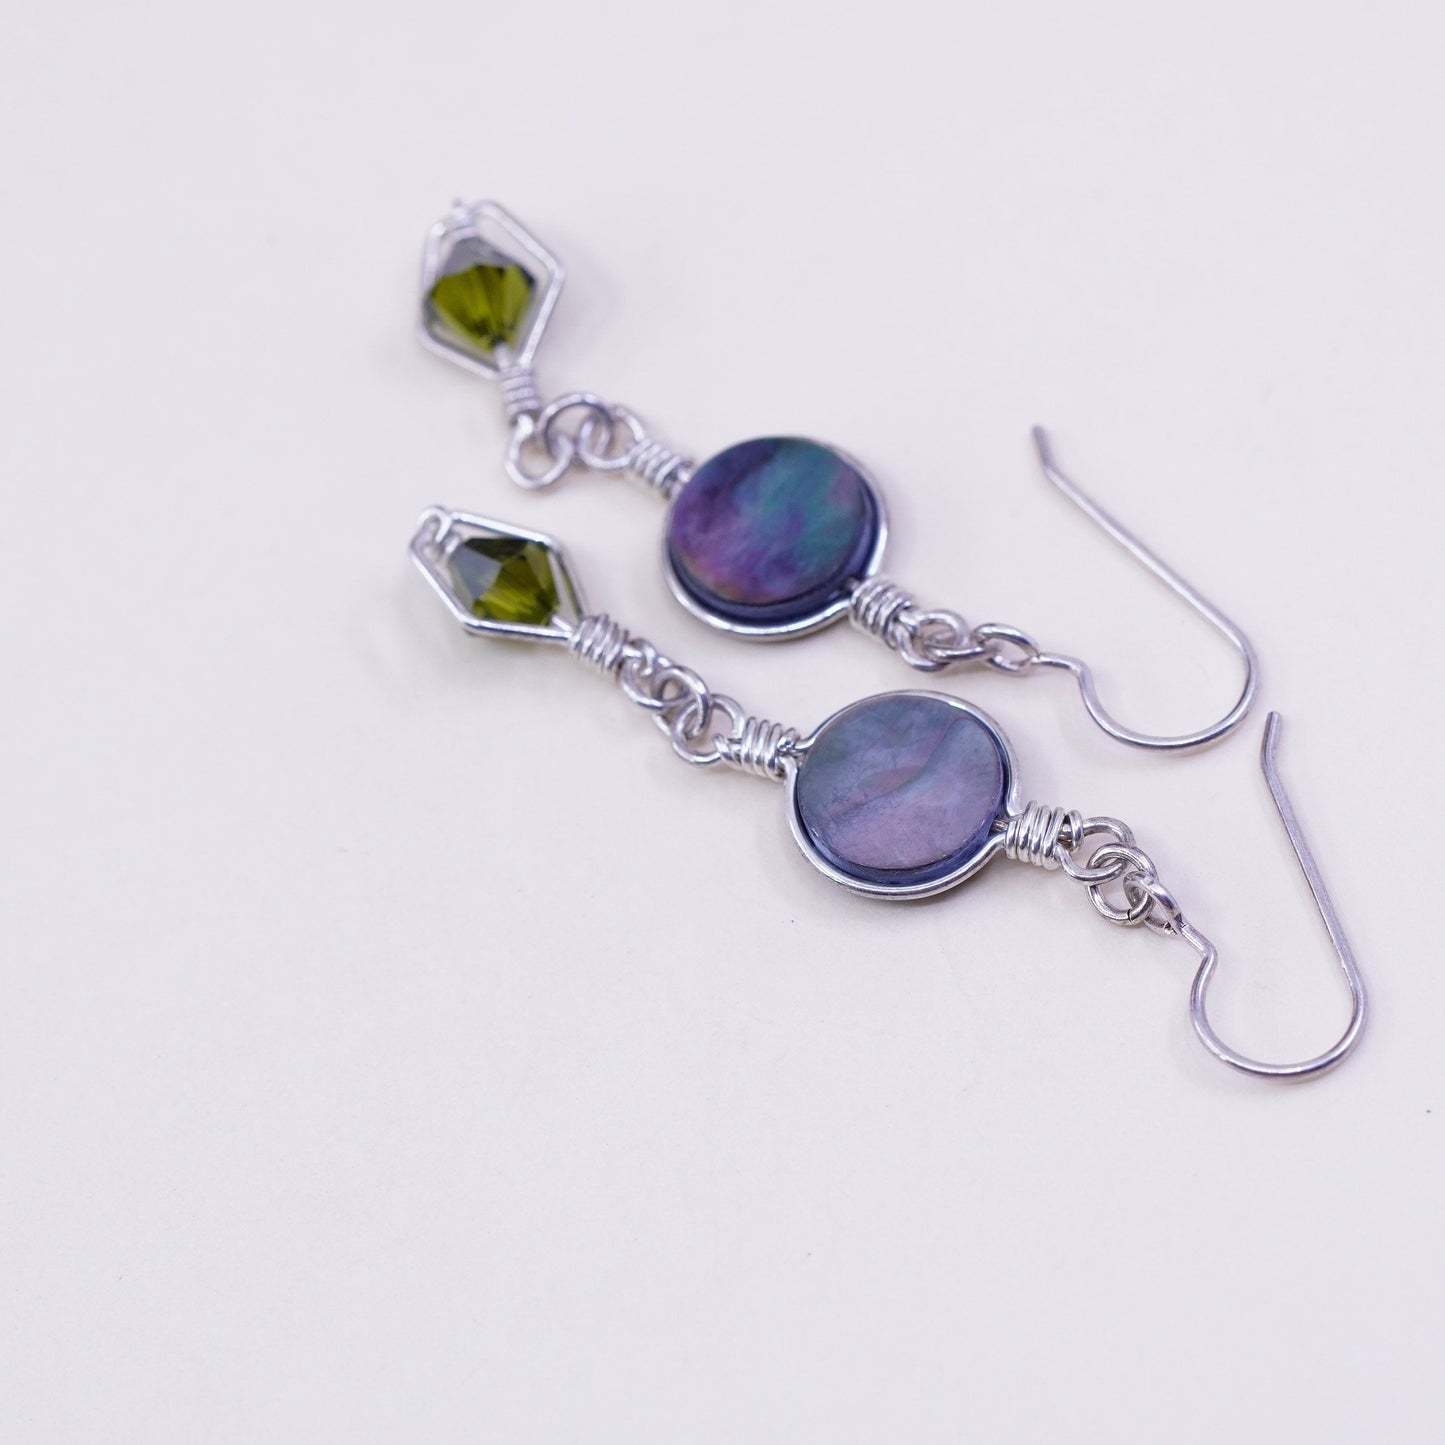 Vintage sterling silver handmade earrings, 925 hooks with circle abalone and peridot, silver tested